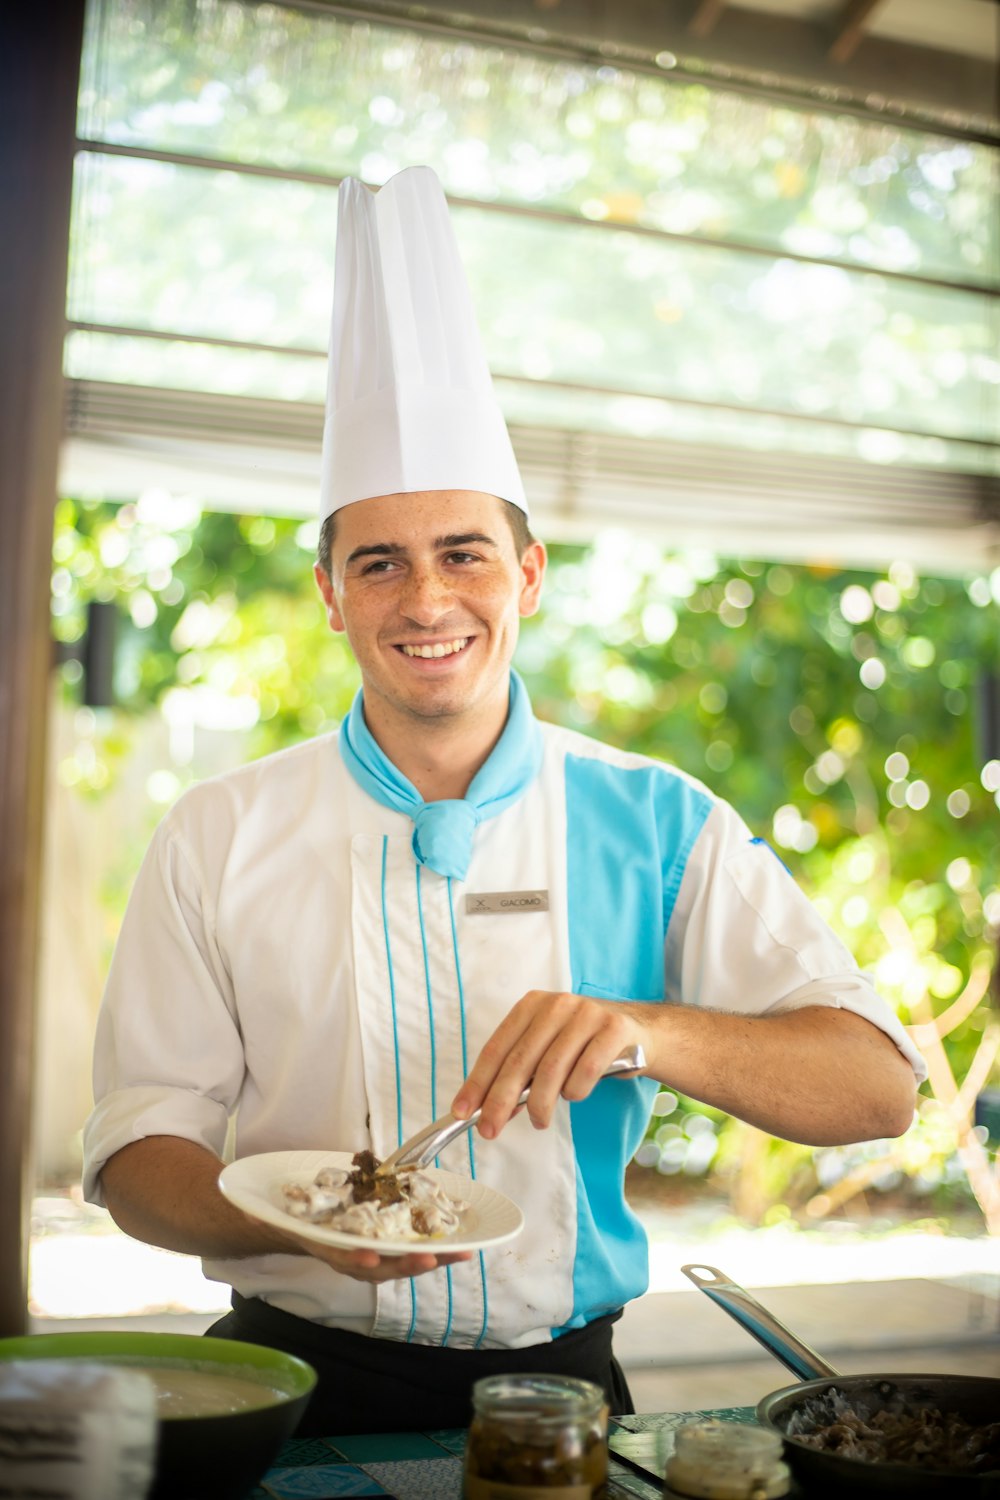 a man in a chef's hat holding a plate of food